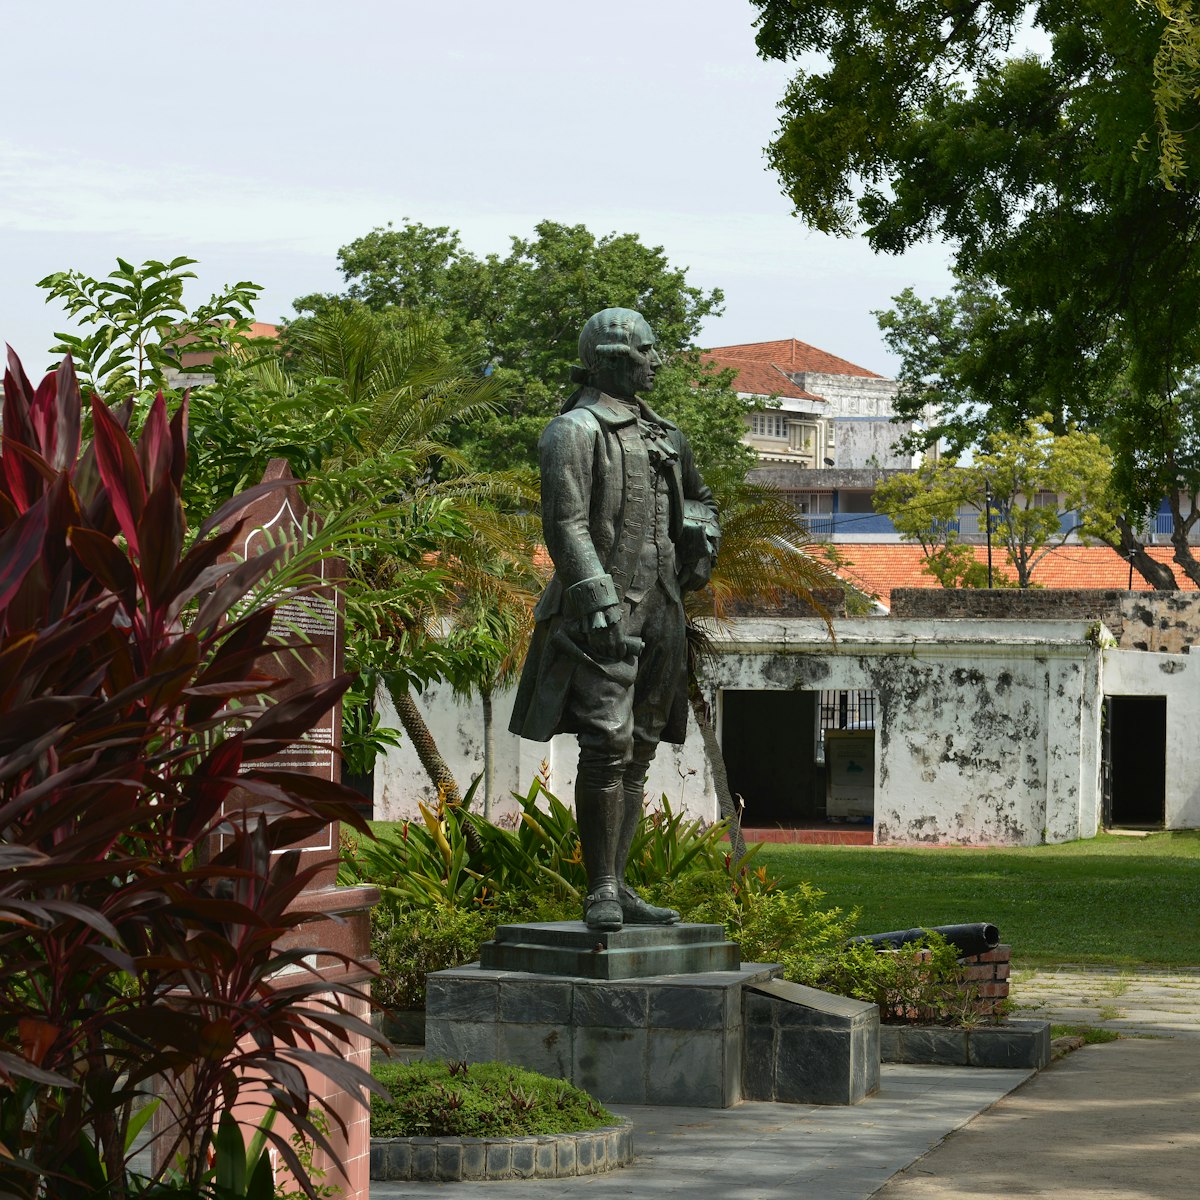 (GERMANY OUT) Statue Franicis Light, Fort Cornwallis, Georgetown, Penang, Malaysia  (Photo by SchÃ¶ning/ullstein bild via Getty Images)